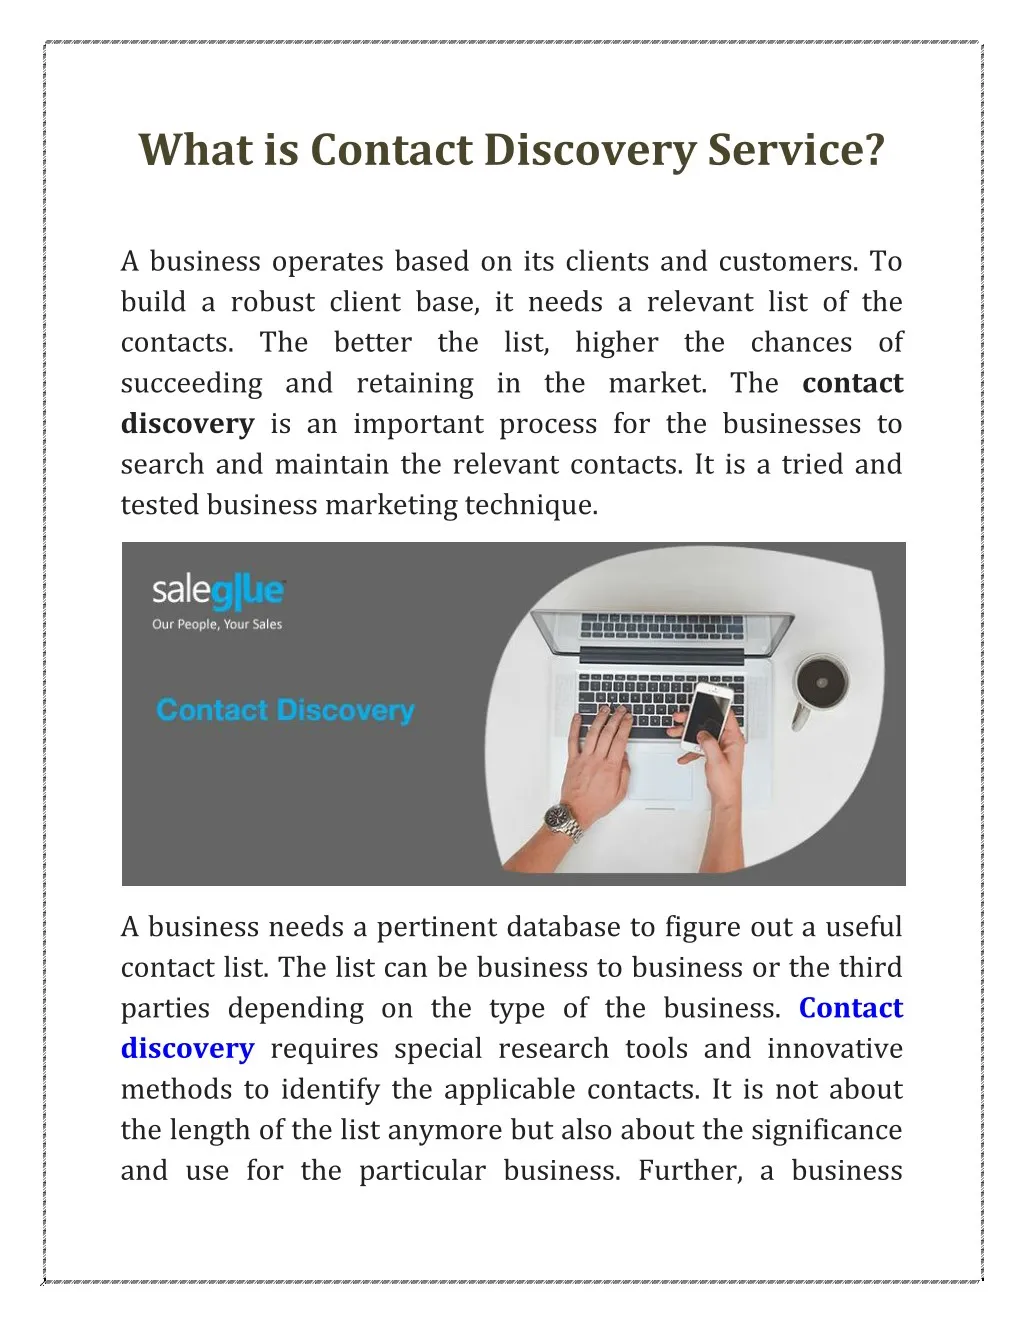 what is contact discovery service